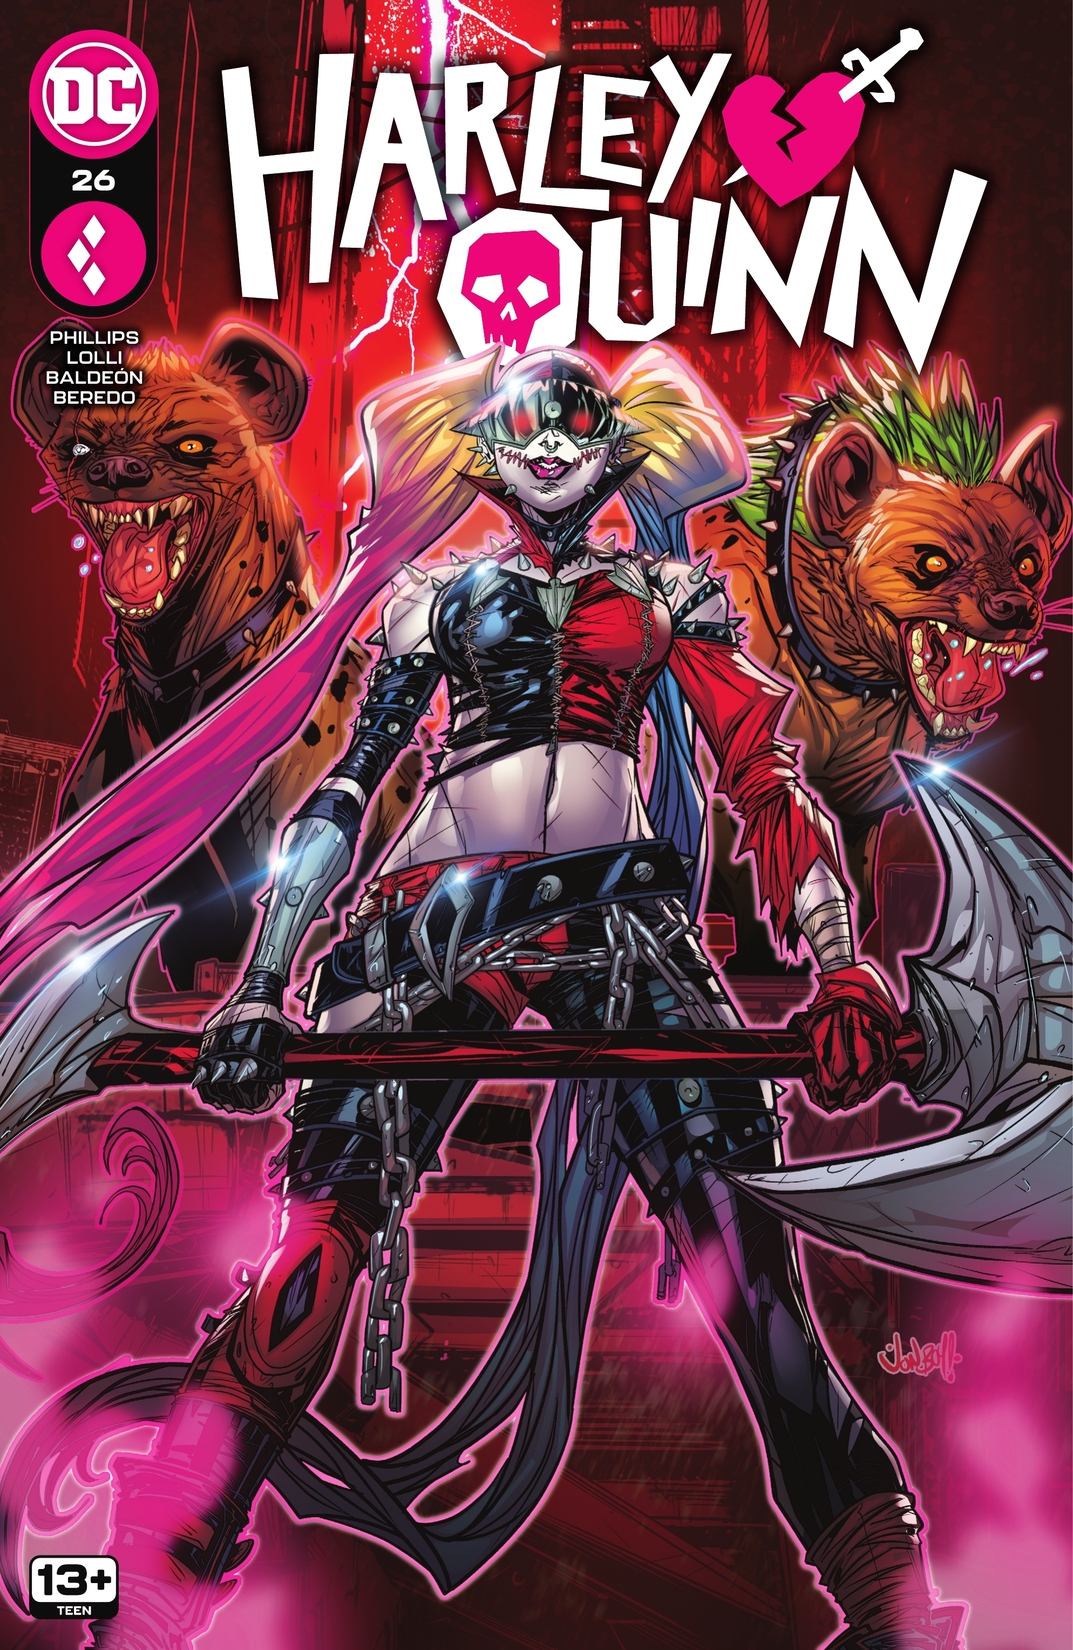 Harley Quinn #26 preview images